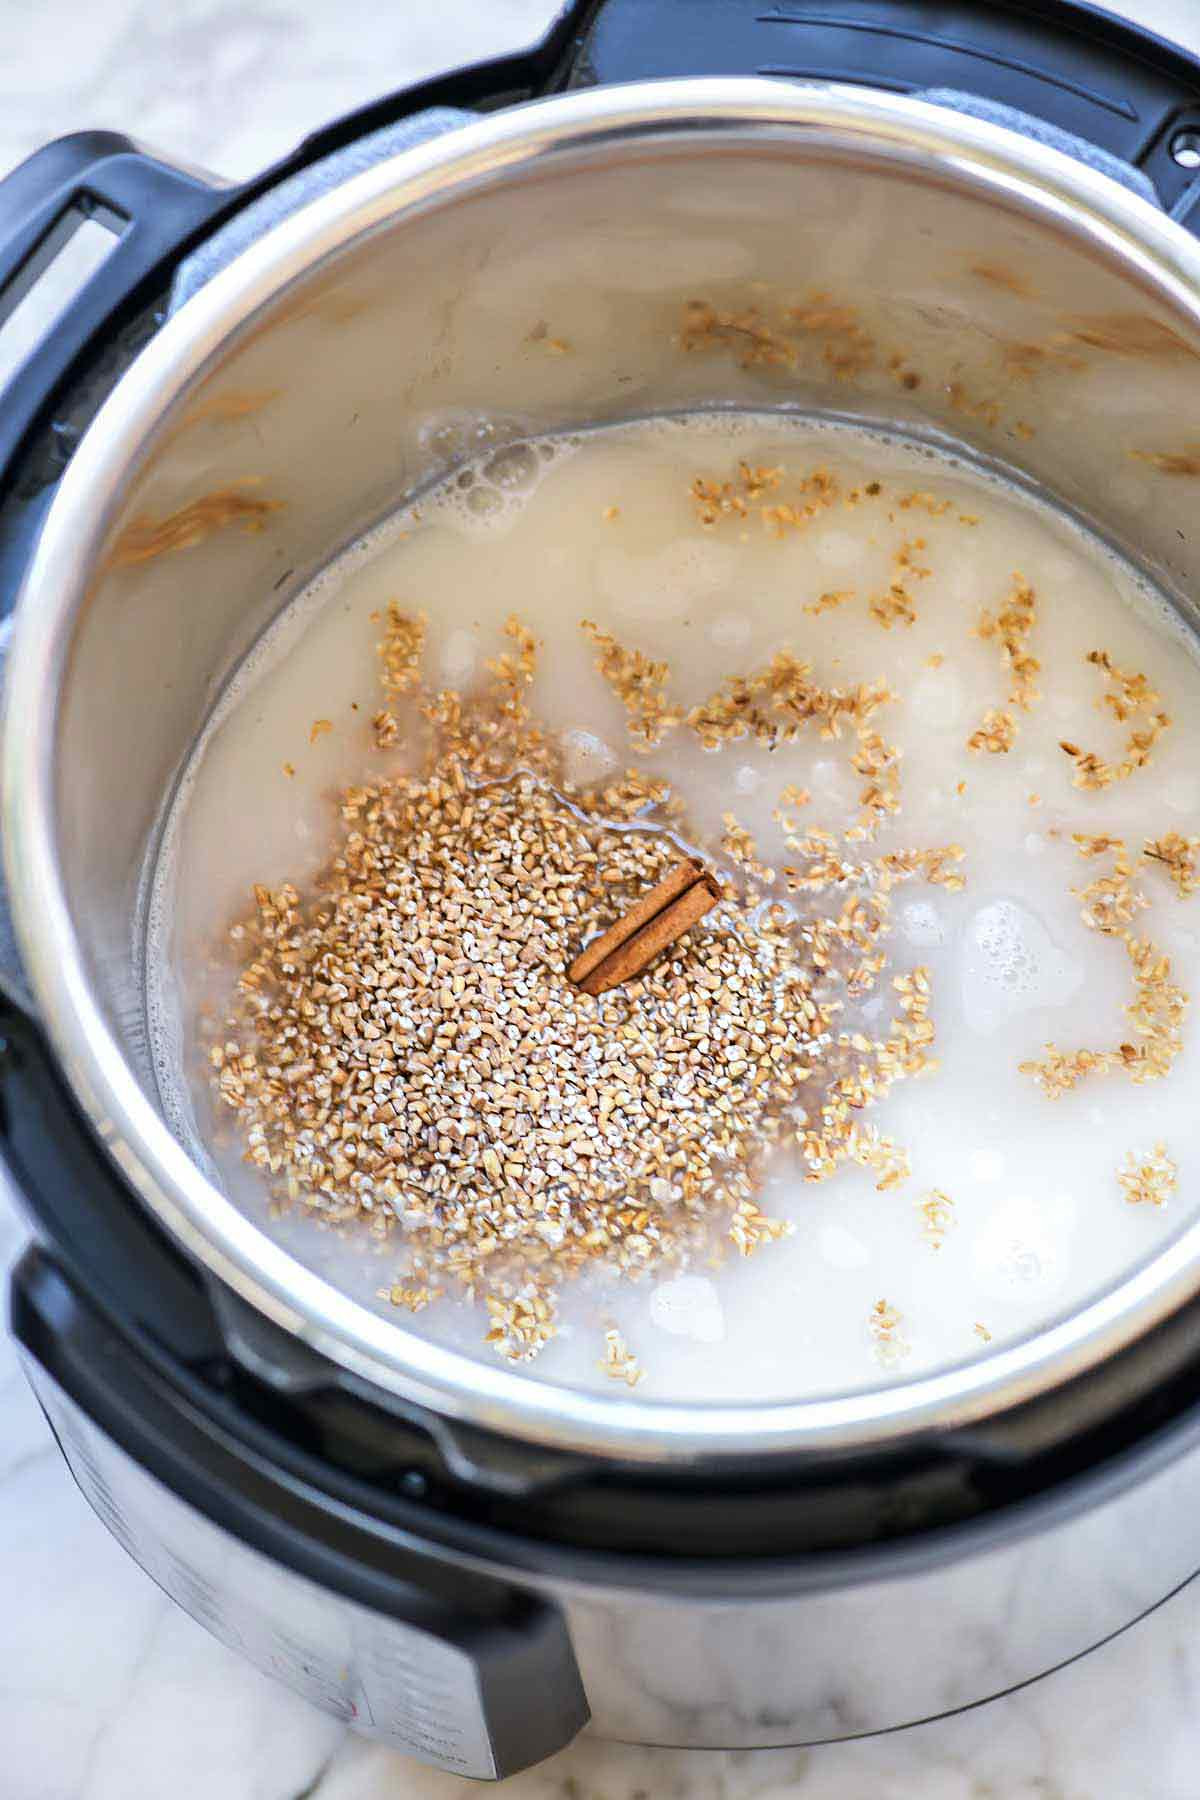 Rolled Oats Instant Pot New Instant Pot Oatmeal Recipe for Steel Cut Oats or Rolled